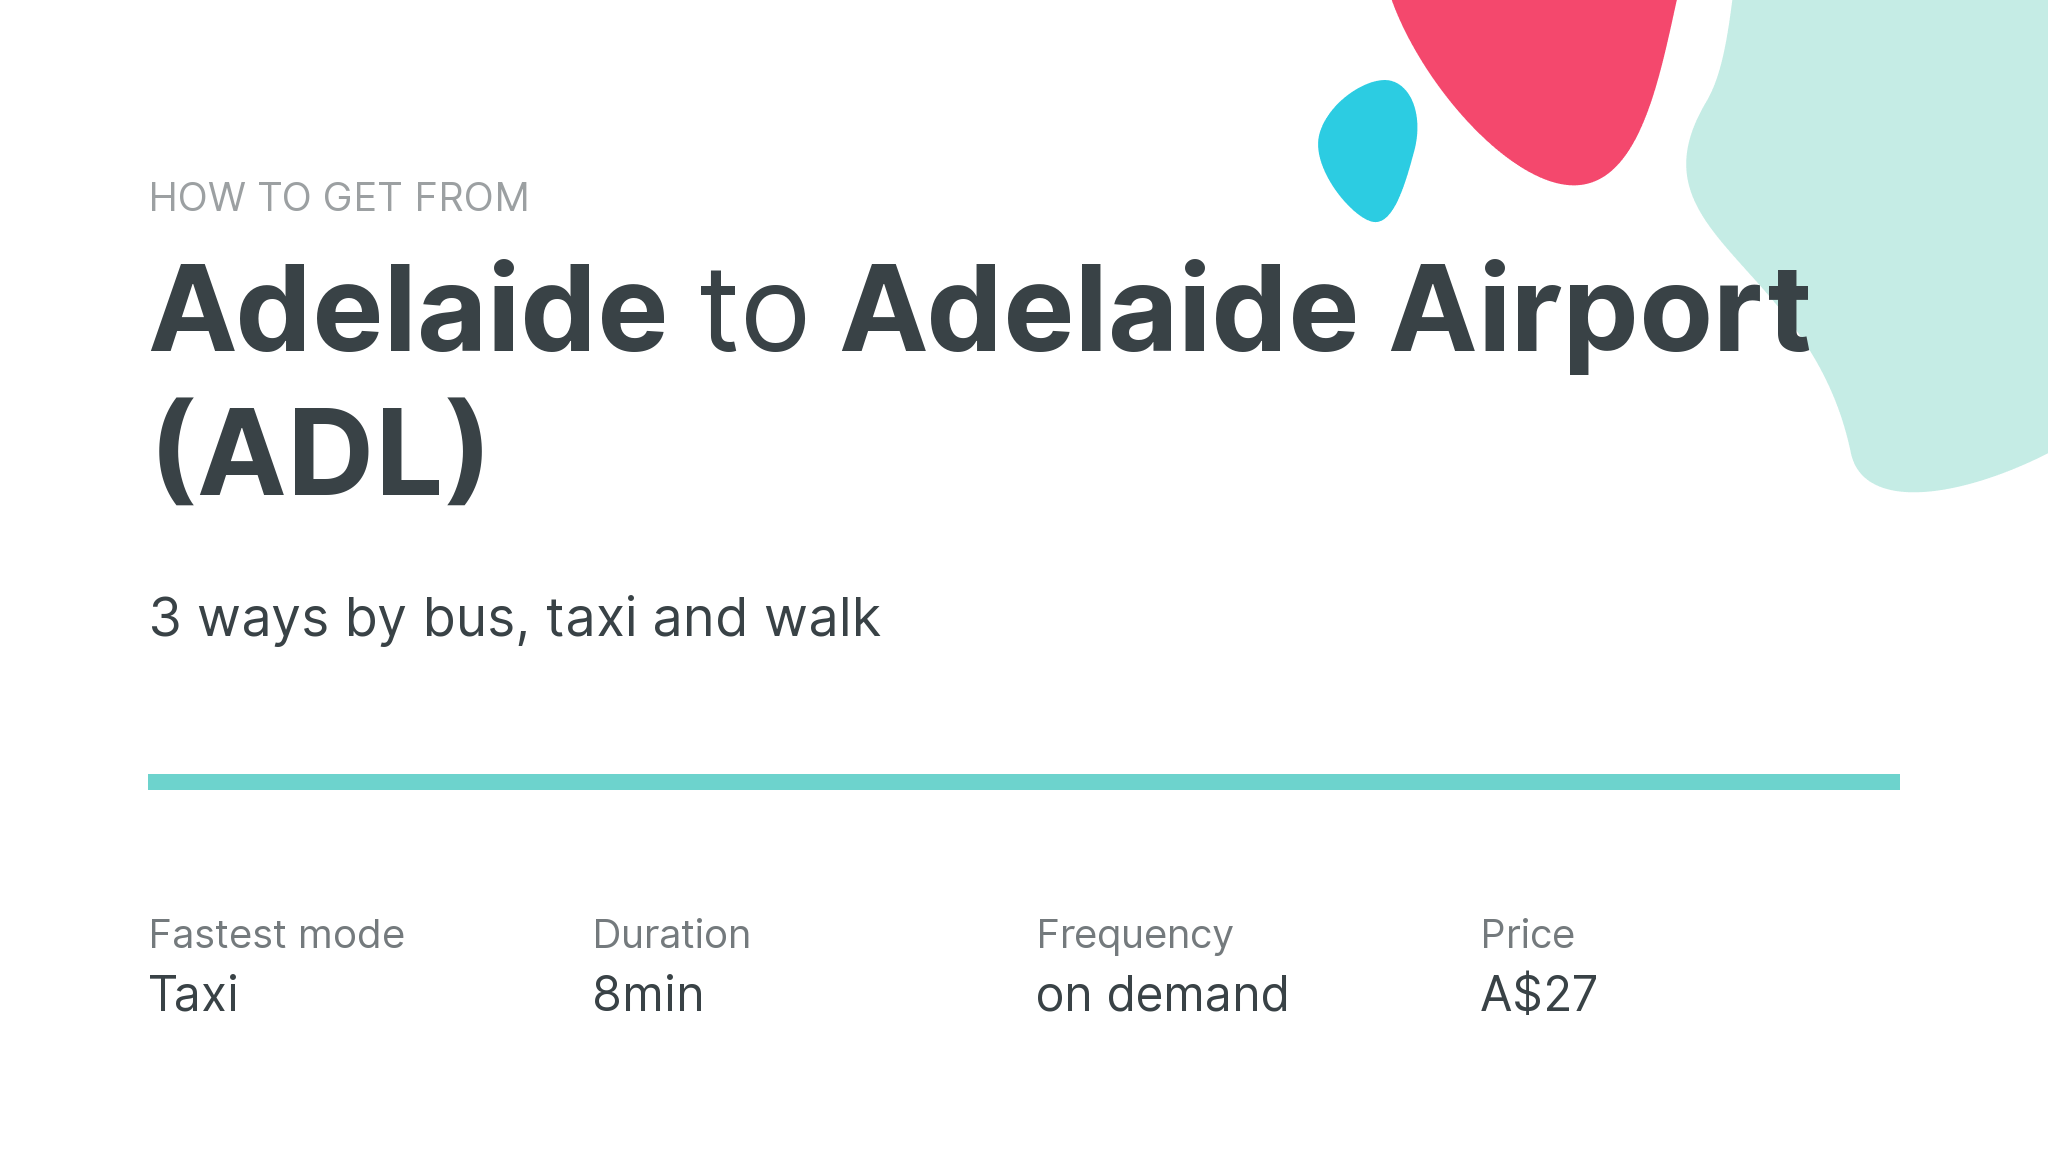 How do I get from Adelaide to Adelaide Airport (ADL)